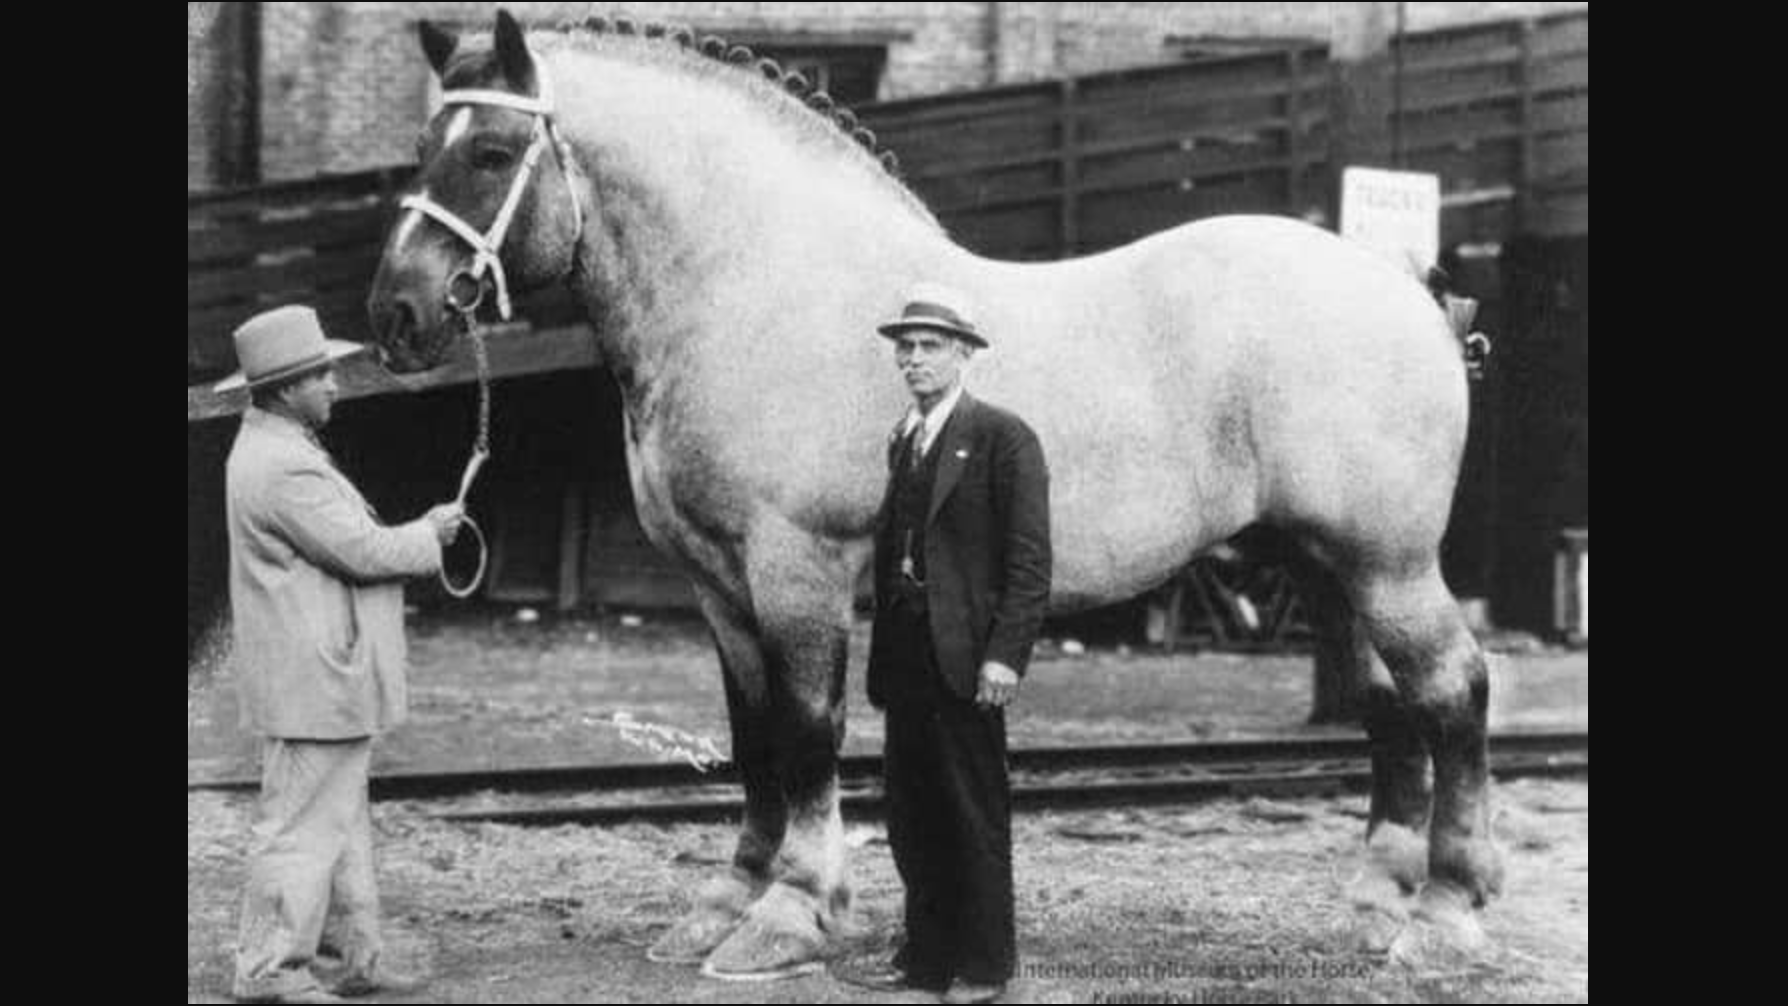 Sampson, the largest horse in history.